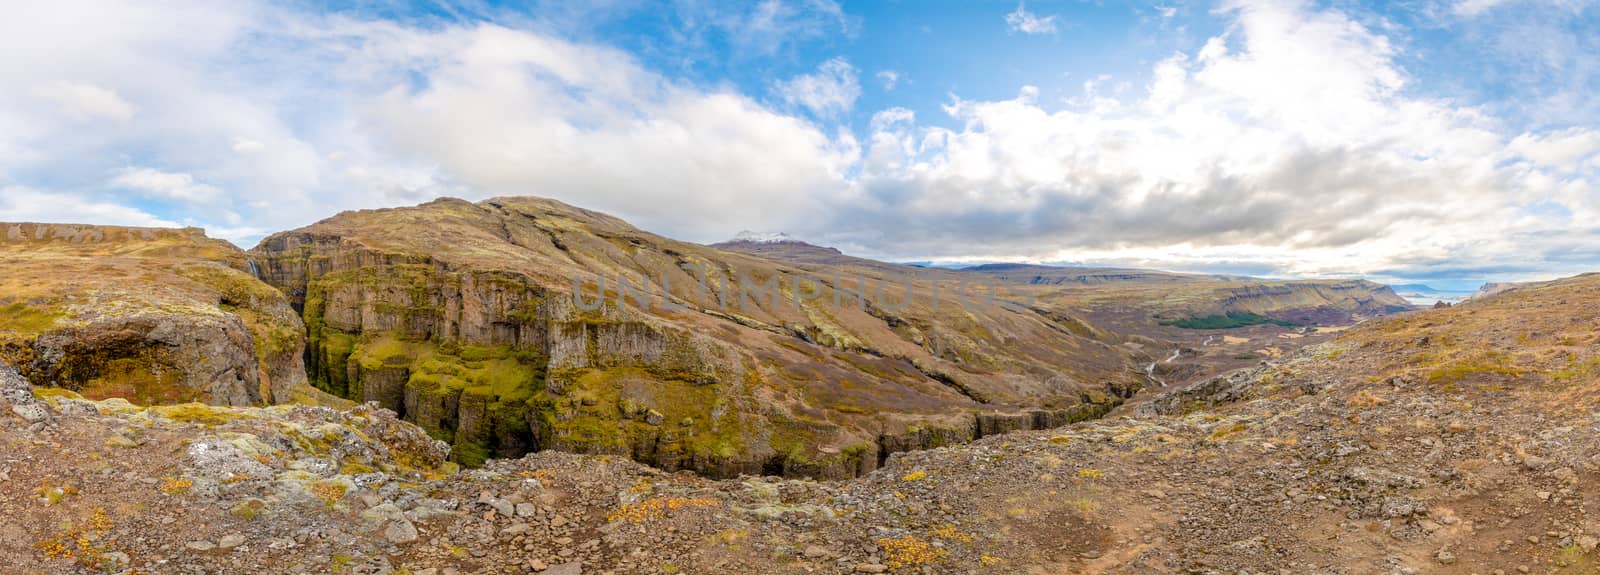 Glymur waterfall in Iceland panorama of gorge behind fall and river leading down to lake by MXW_Stock